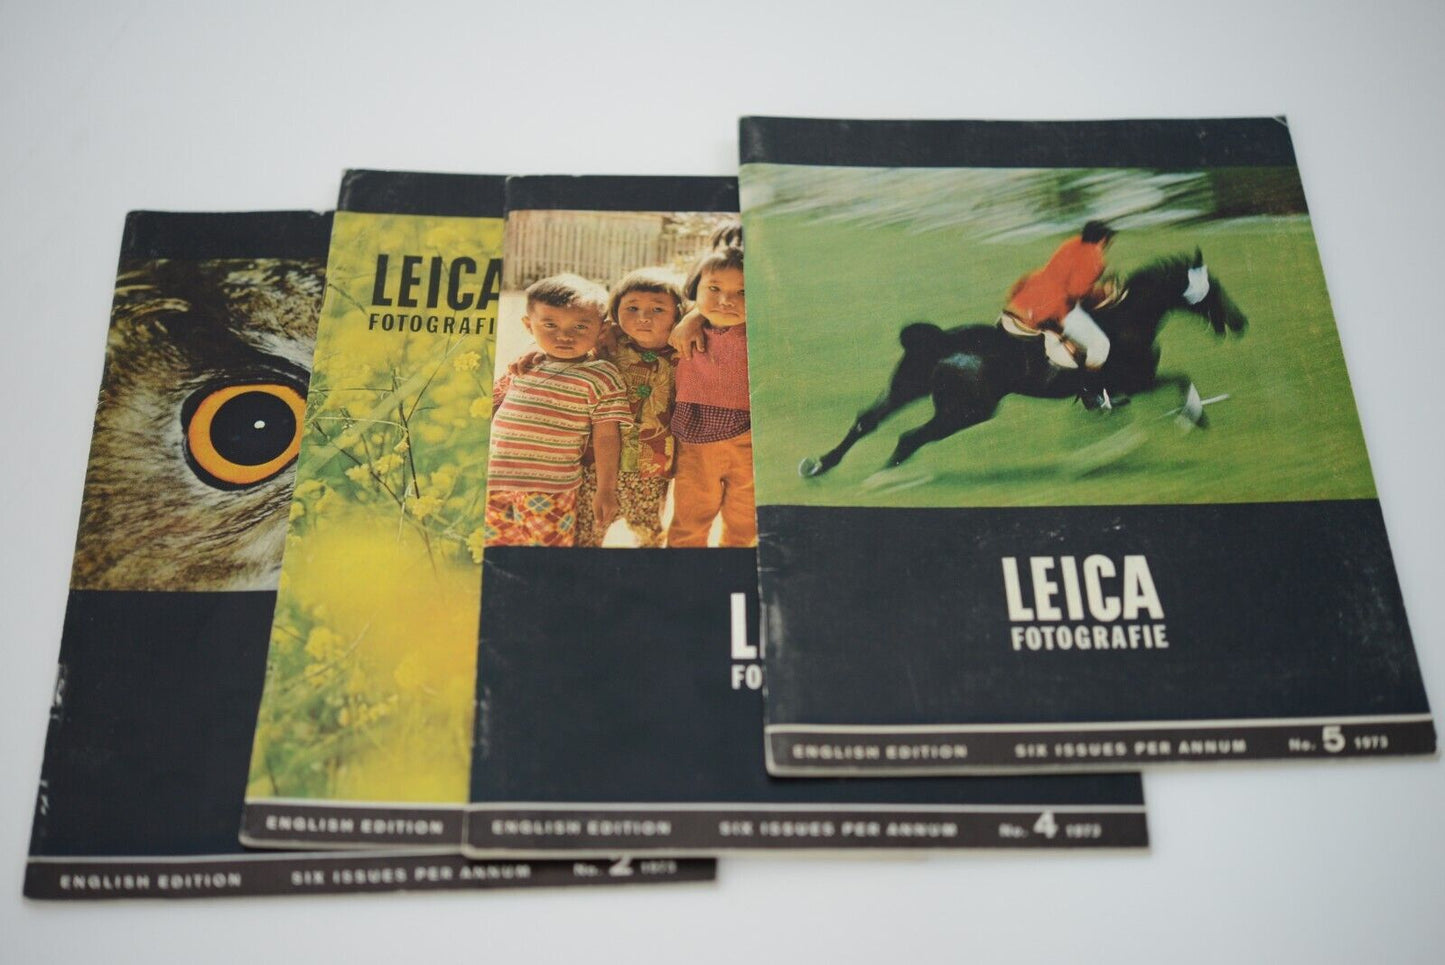 35X LEICA FOTOGRAFIE 1970s ISSUES MAGAZINES (1970 TO 1979) CLEAN AND COMPLETE